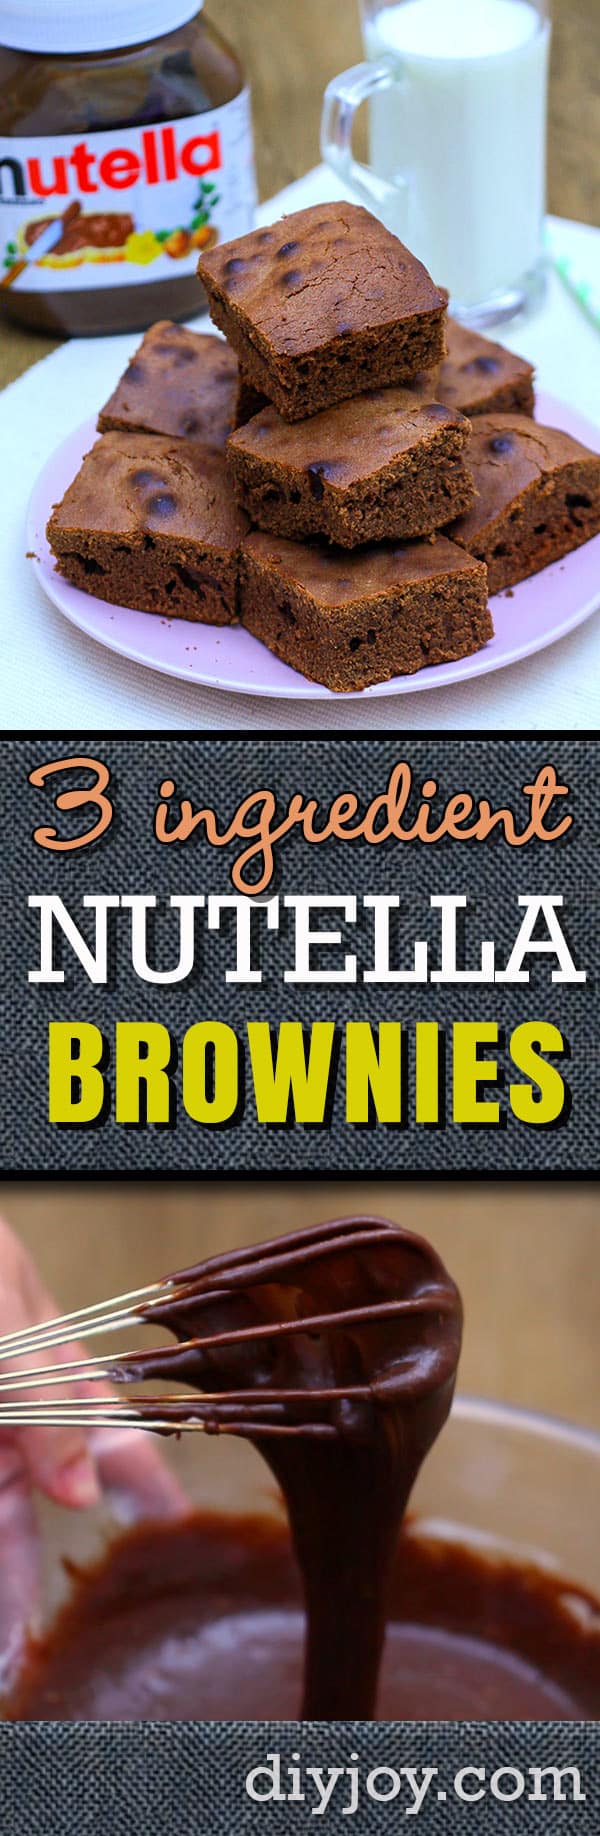 Nutella Brownies are Quick and Easy With This 3 Ingredient Recipe Idea - Video Tutorial with Step by Step Instructions - Quick Dessert Idea to Take To A Party